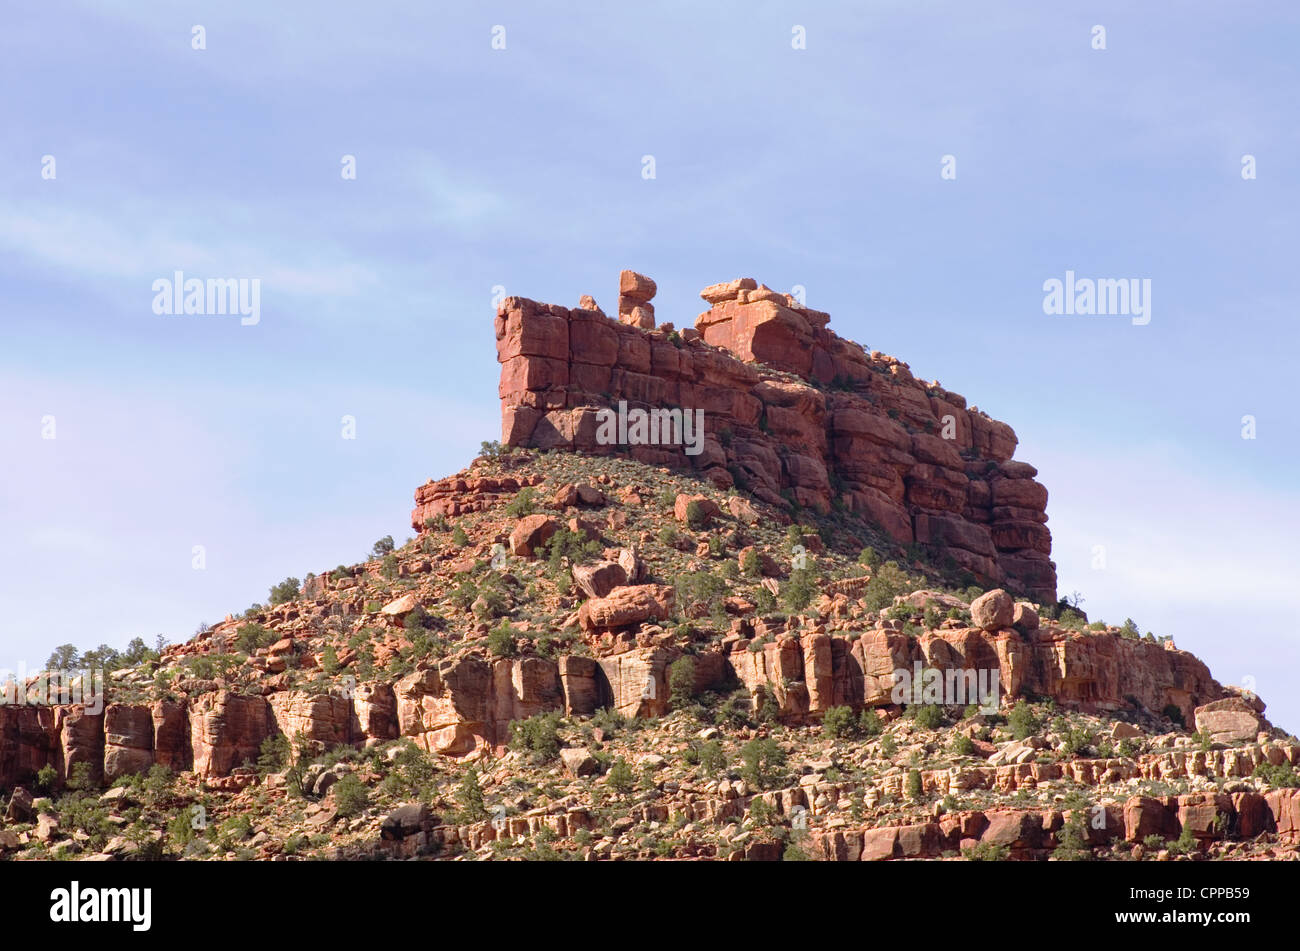 Battleship Rock formation in the Grand Canyon Stock Photo